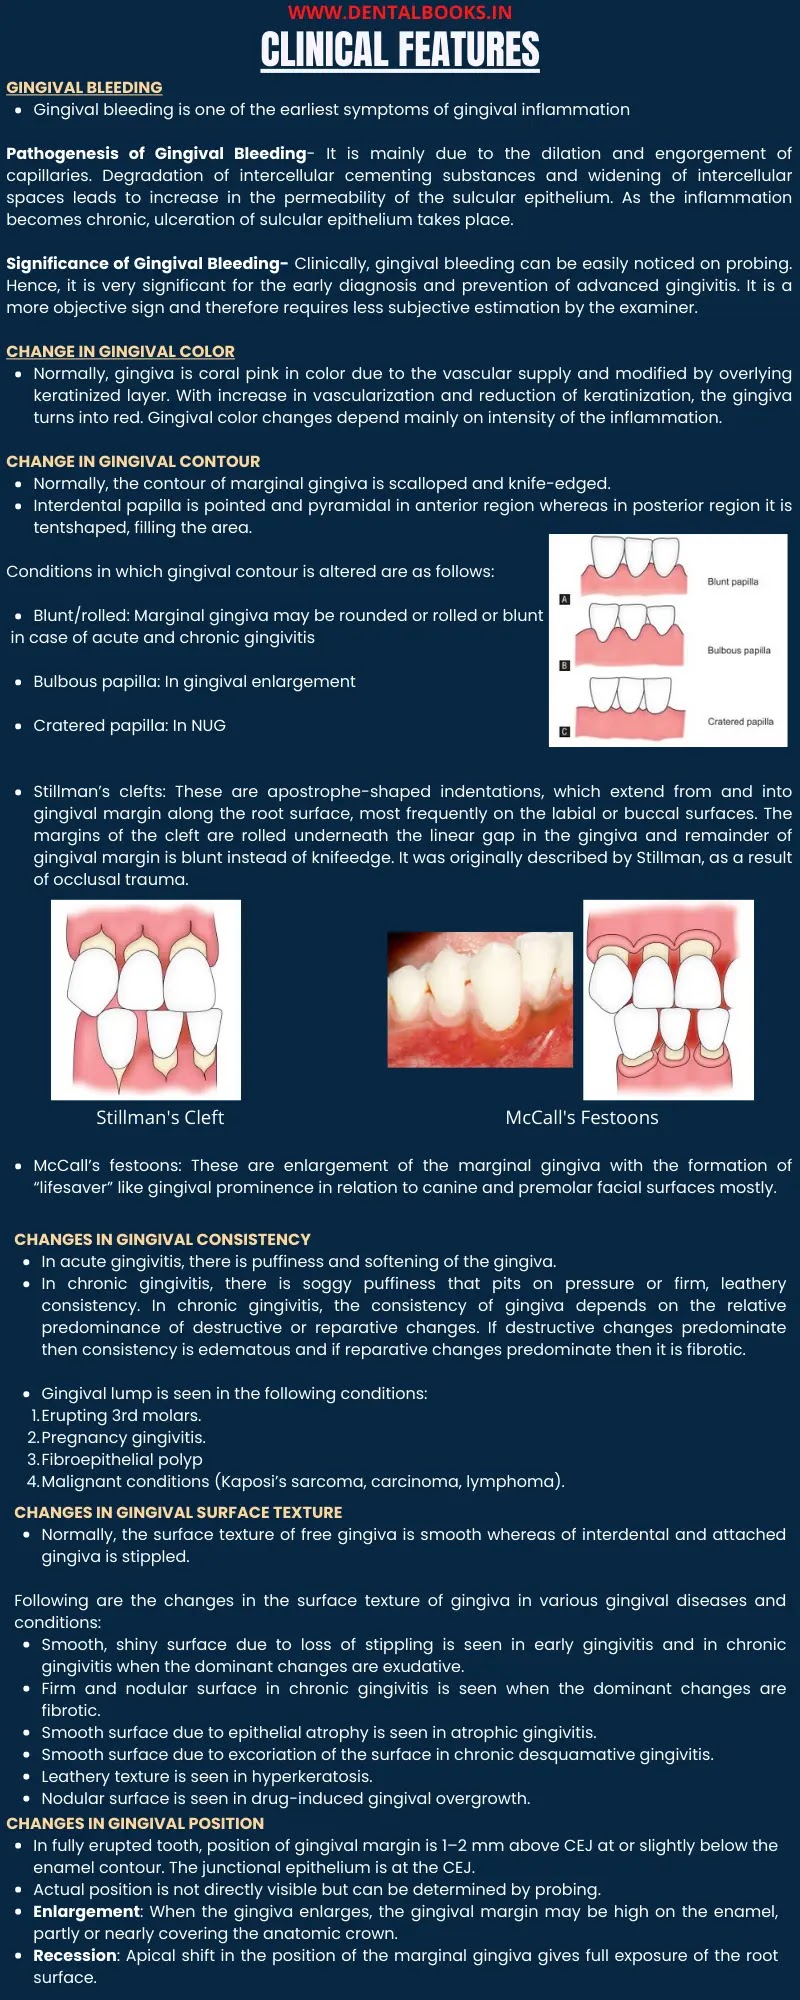 Gingivitis- Introduction, Classification, Stages and Clinical Features | Periodontics Lectures | Dental Notes